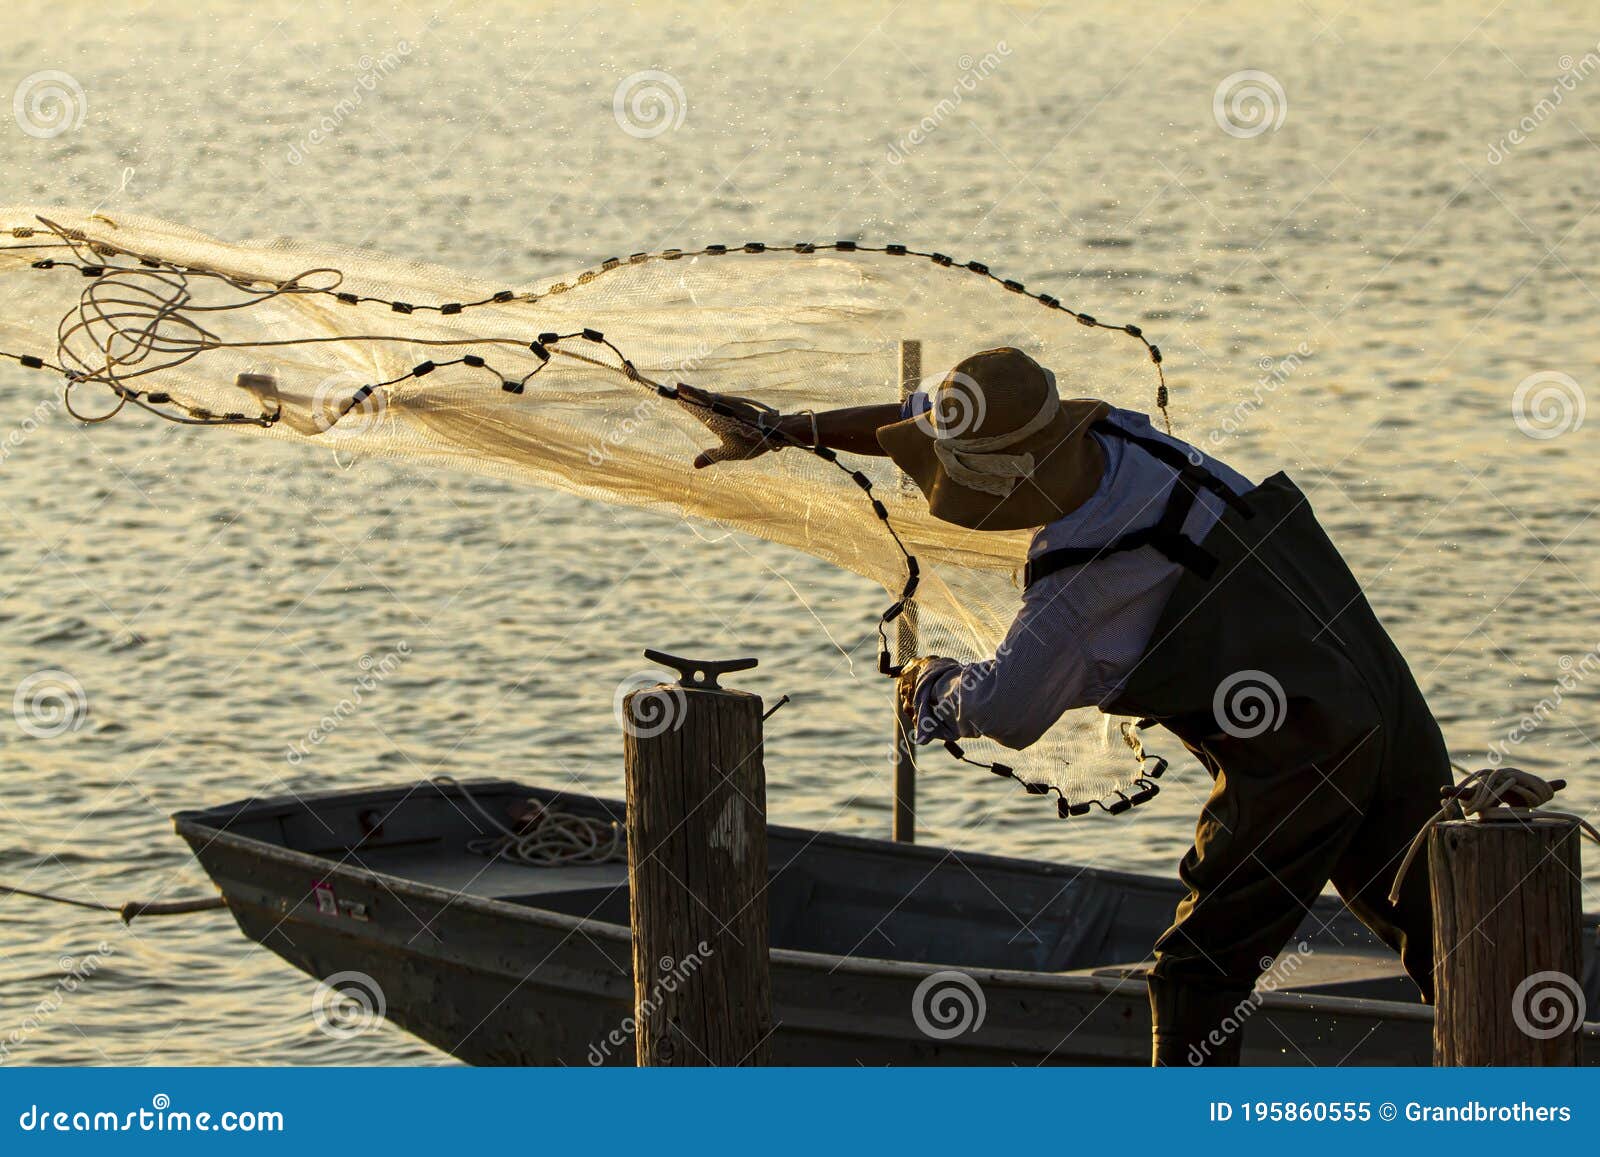 A Fisherman Casting a Fishing Net Stock Image - Image of carrying